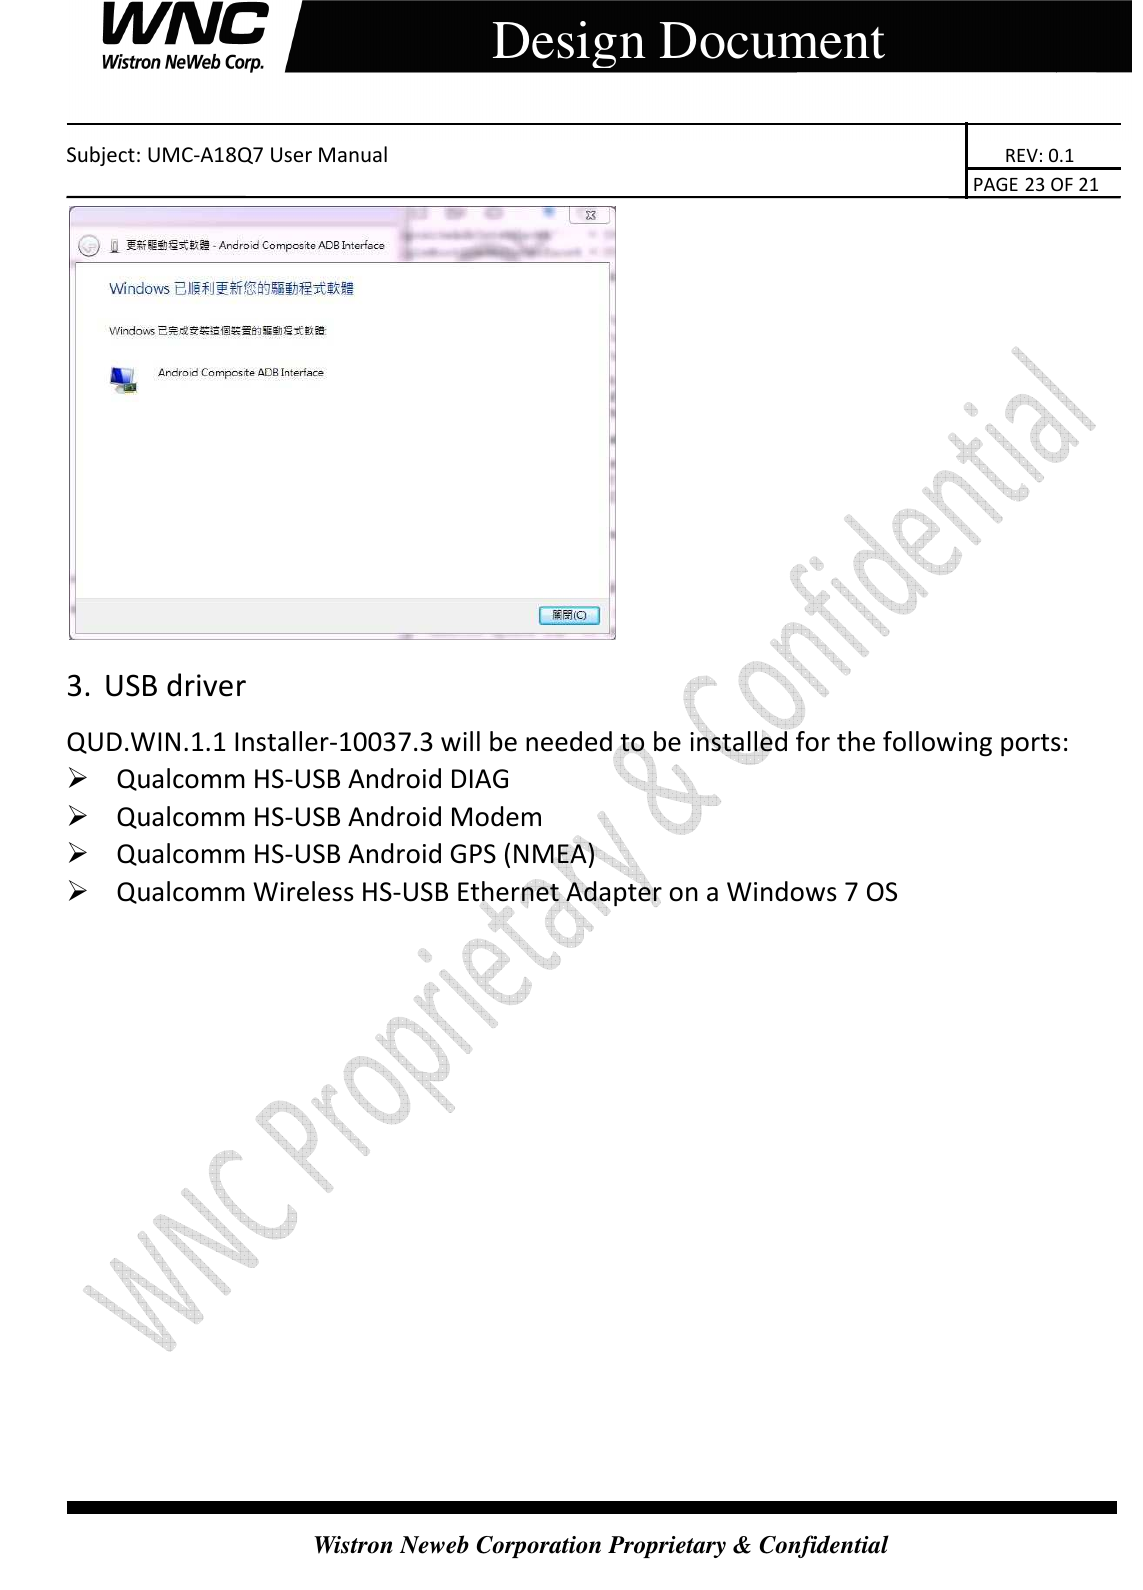    Subject: UMC-A18Q7 User Manual                                                                       REV: 0.1                                                                                                                                                                               PAGE 23 OF 21  Wistron Neweb Corporation Proprietary &amp; Confidential     Design Document  3. USB driver QUD.WIN.1.1 Installer-10037.3 will be needed to be installed for the following ports:  Qualcomm HS-USB Android DIAG  Qualcomm HS-USB Android Modem  Qualcomm HS-USB Android GPS (NMEA)  Qualcomm Wireless HS-USB Ethernet Adapter on a Windows 7 OS  